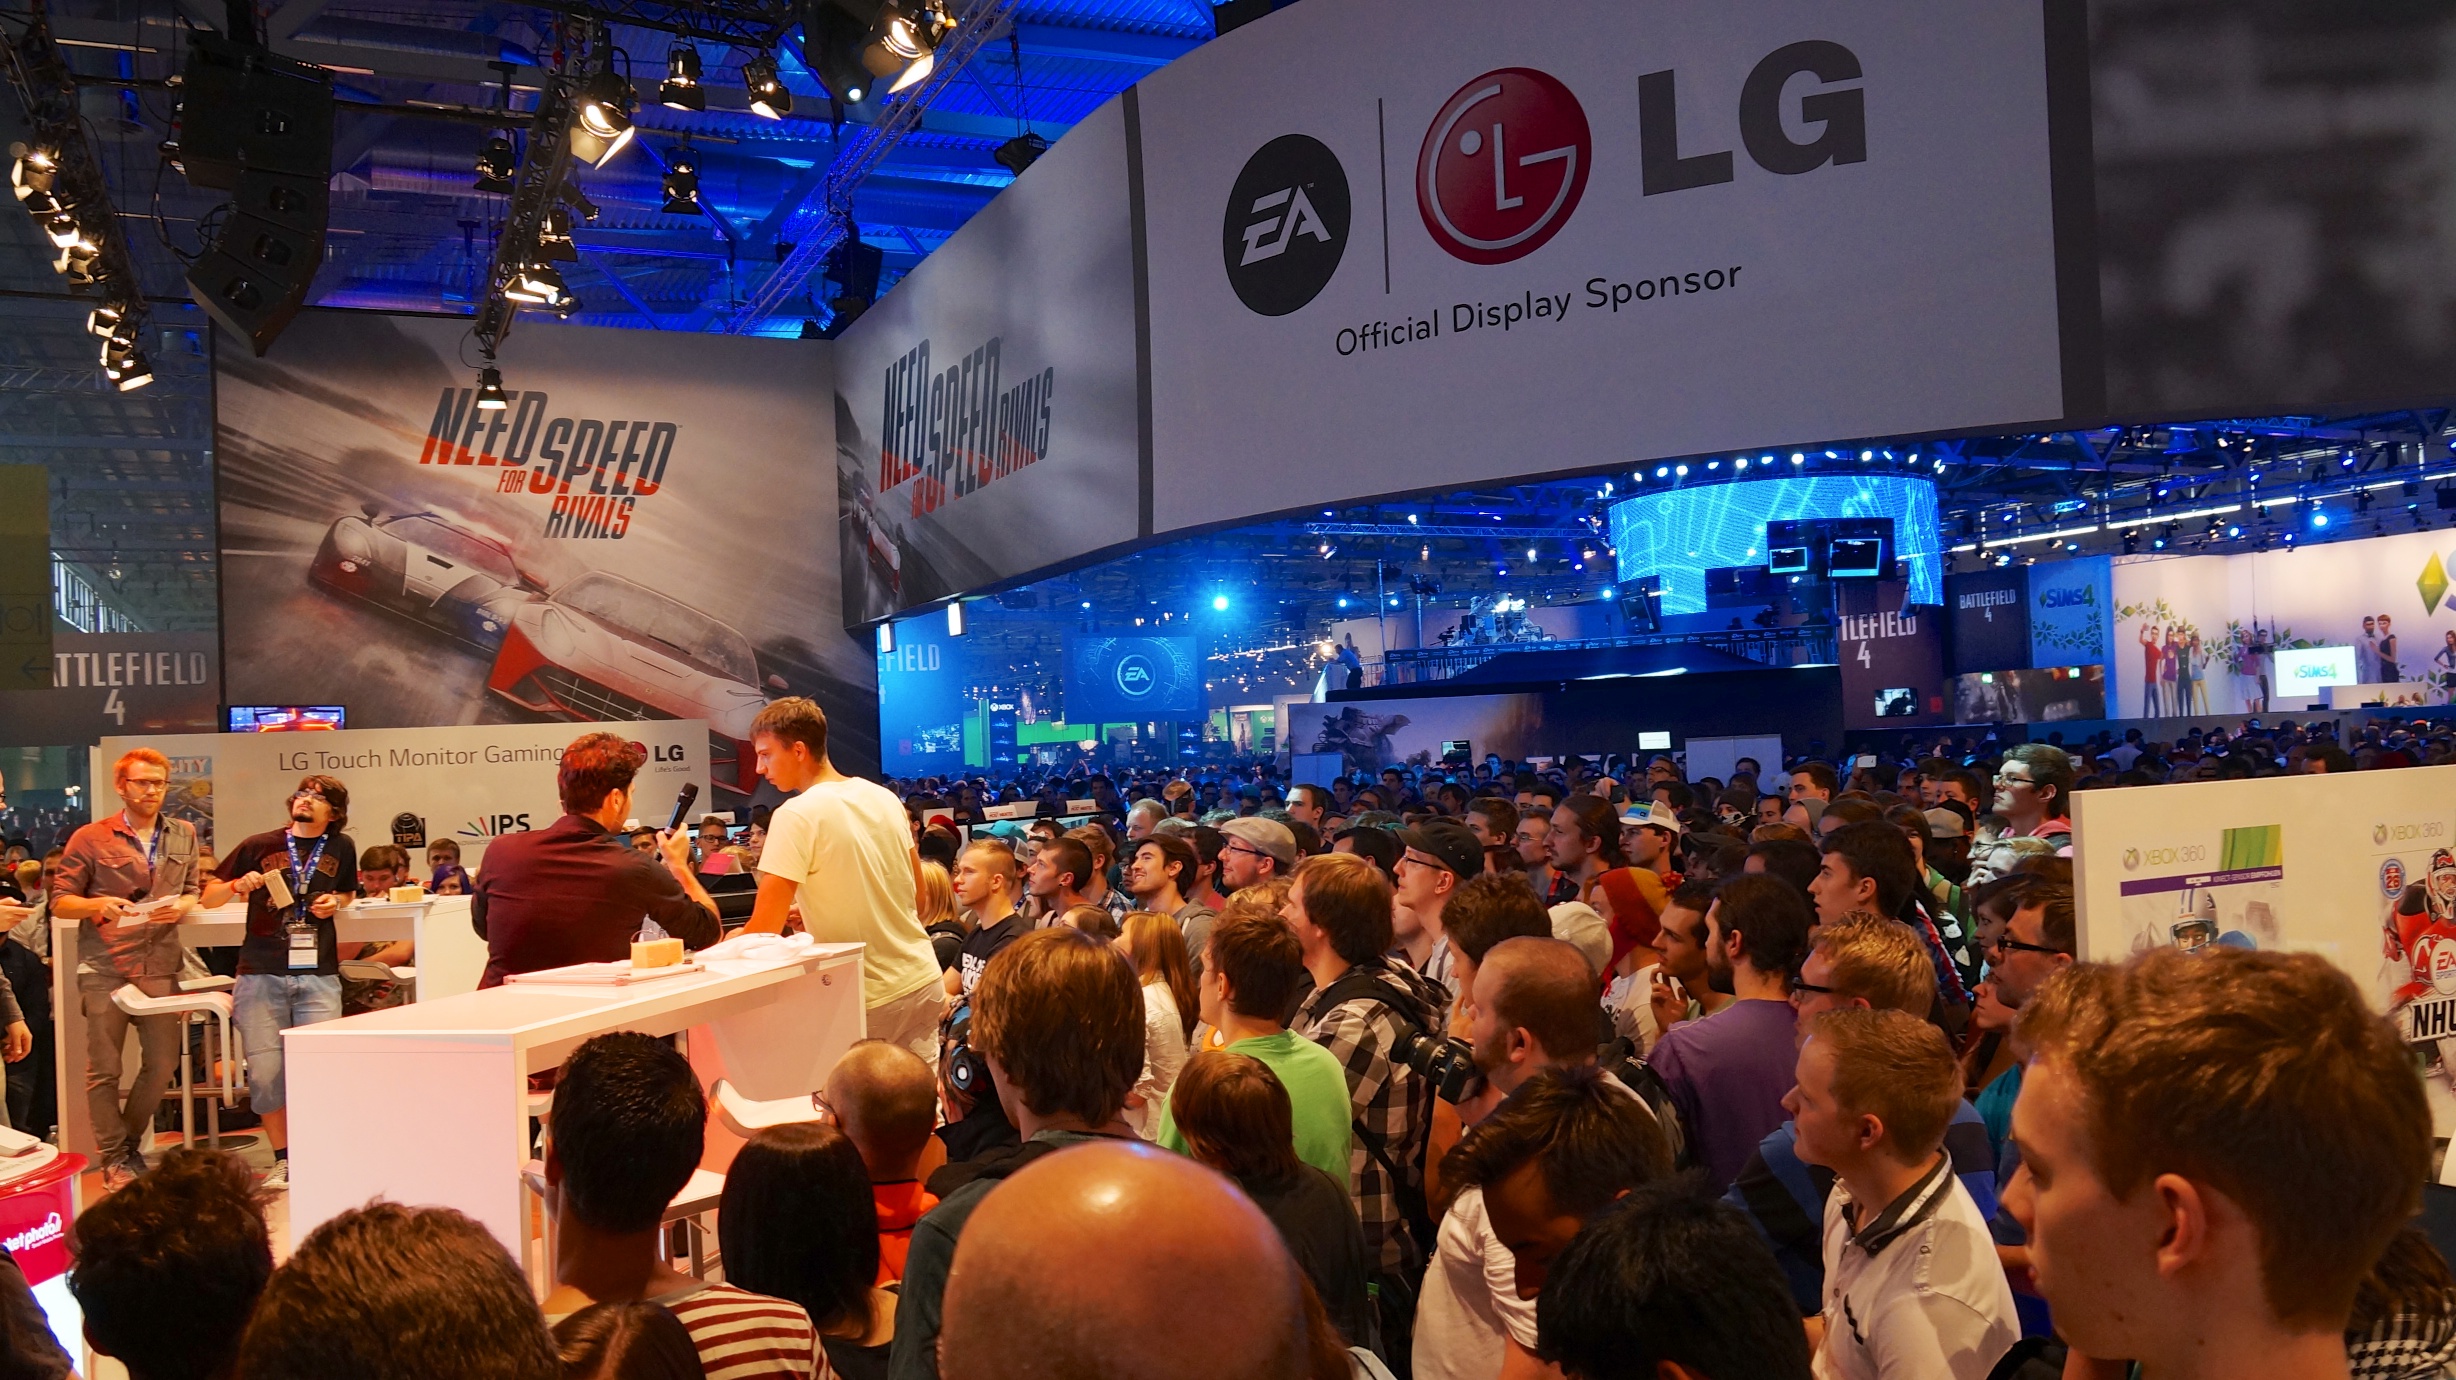 Staff at LG and EA’s stage interview a visitor while others watch on at Gamescom 2013